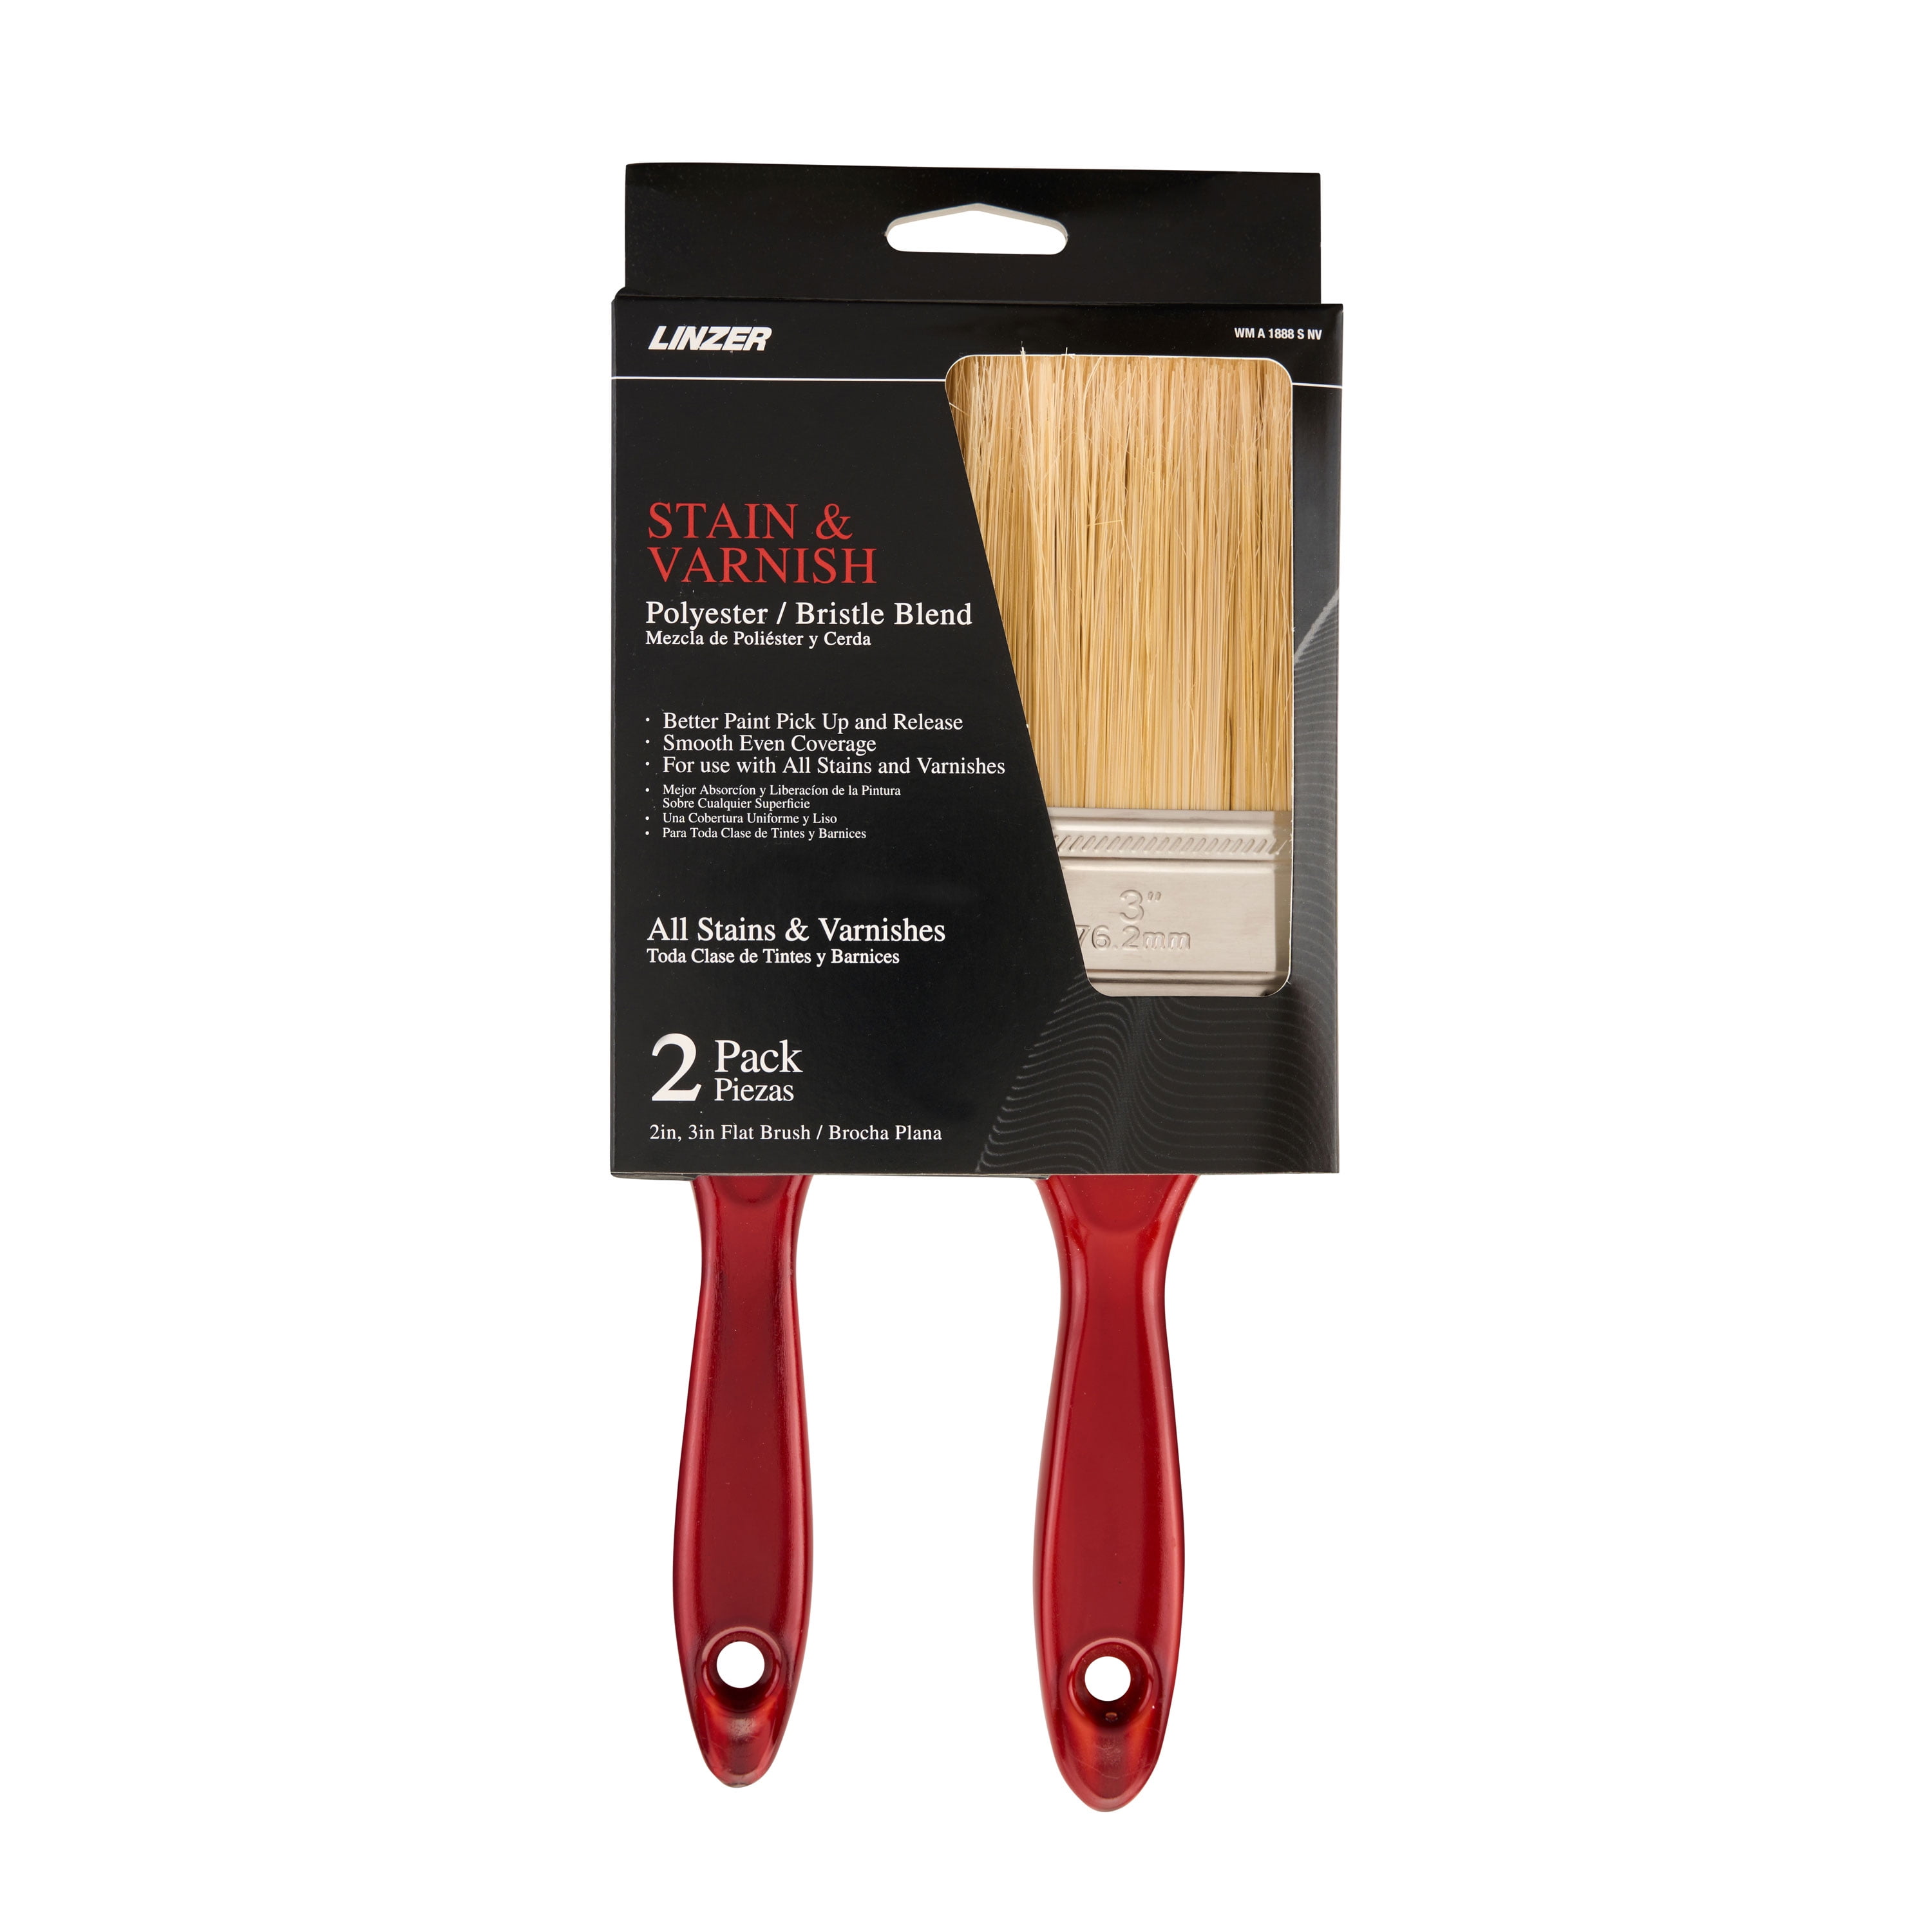 Wax Brush - Furniture Wax Applicator - Round Brush with Densely Packed Synthetic